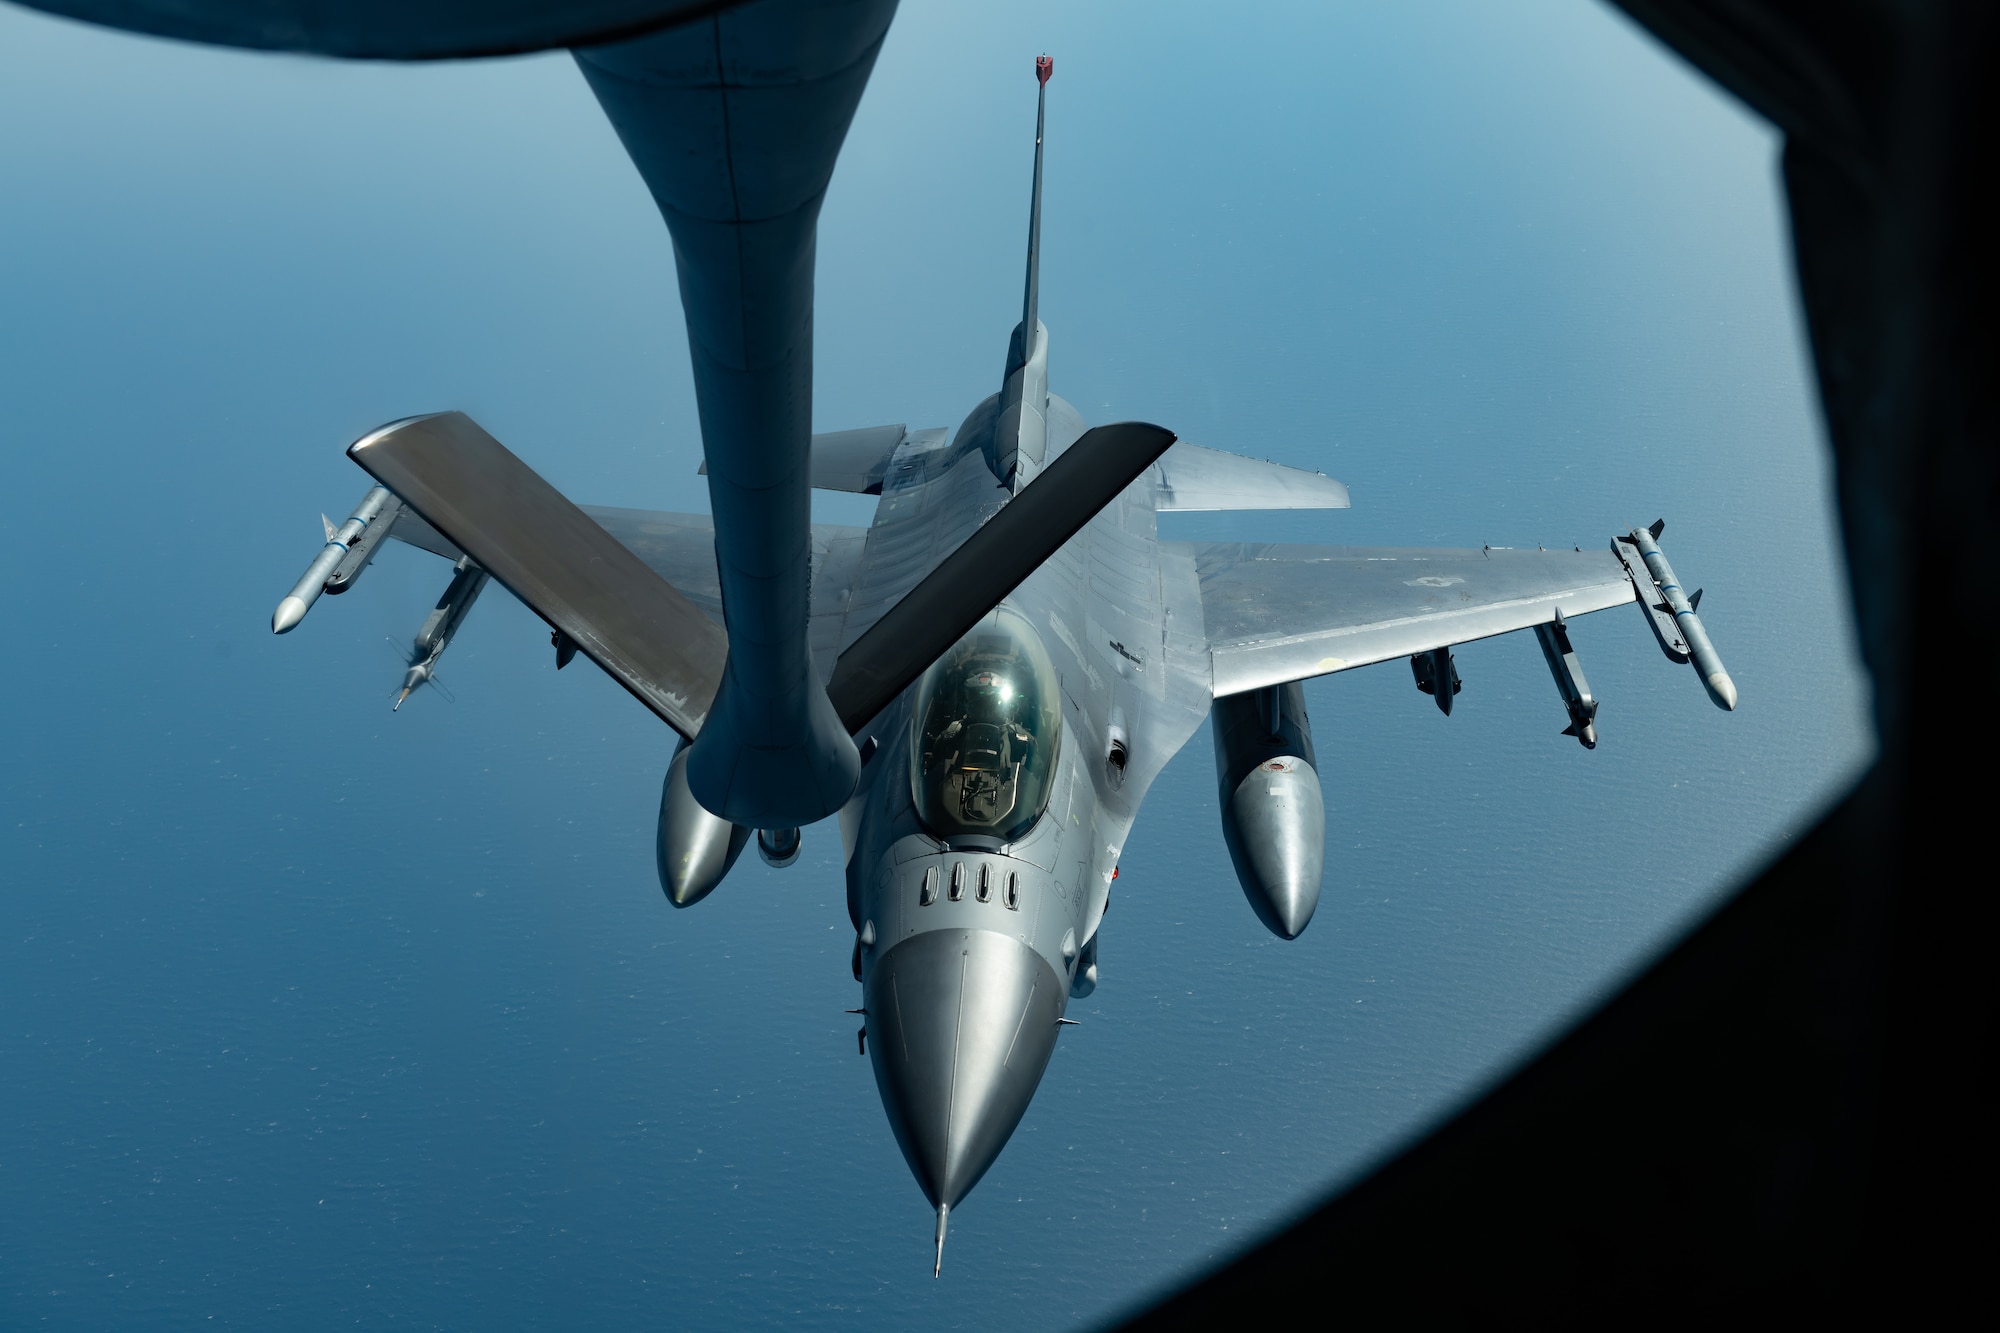 An F-16CM Fighting Falcon from the 35th Fighter Wing, Misawa Air Base, prepares to refuel with a KC-135 Stratotanker from the 909th Air Refueling Squadron, Kadena Air Base, during a routine training exercise off the coast of Japan, May 8, 2019. The 909th ARS helps ensure a free-and-open Indo-Pacific by providing air refueling to U.S., allies and partners within the area of responsibility. (U.S. Air Force photo by Airman 1st Class Matthew Seefeldt)